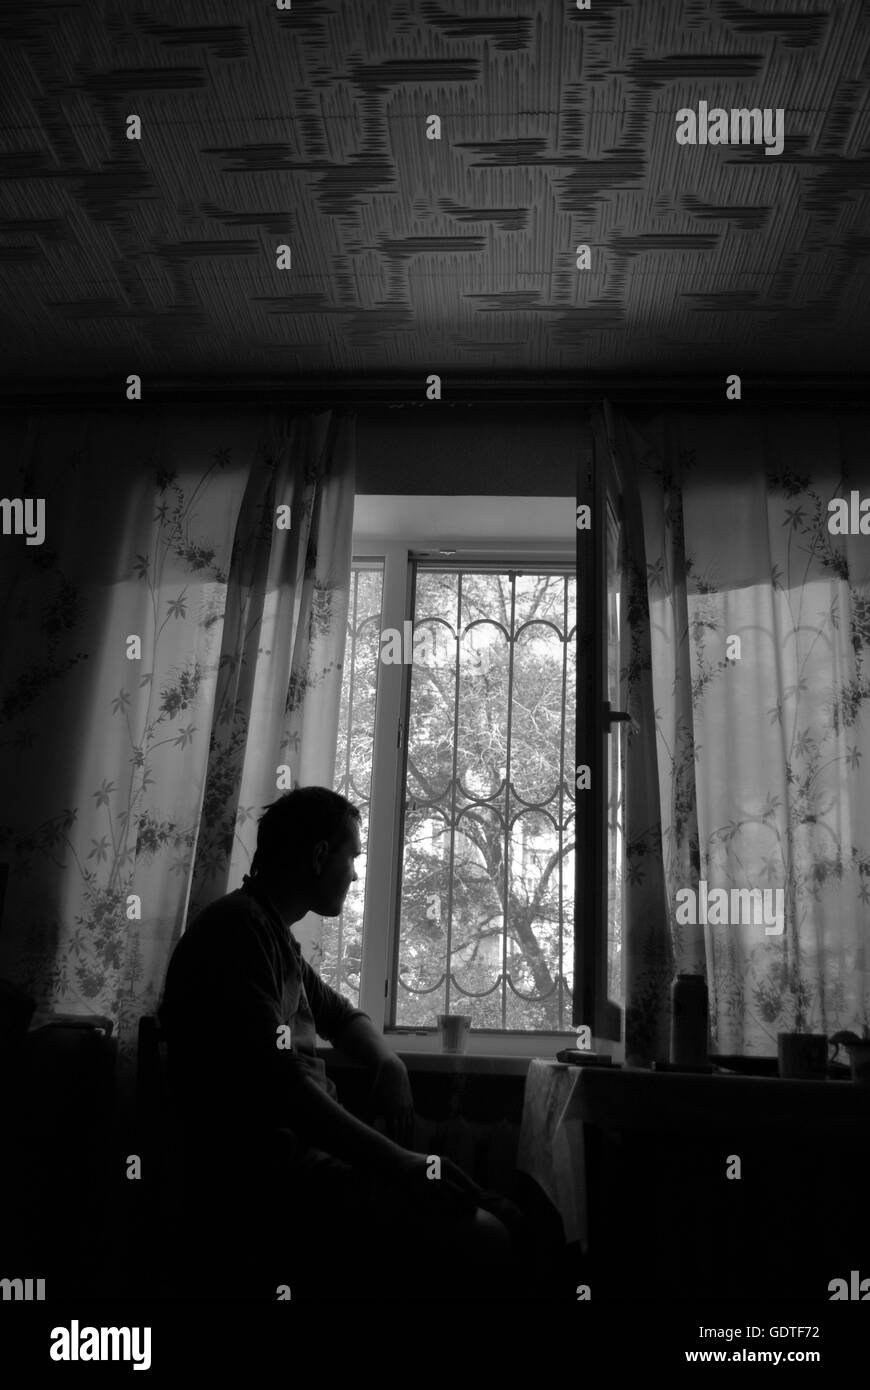 Silhouette of a man sitting in the room and looking through the window Stock Photo